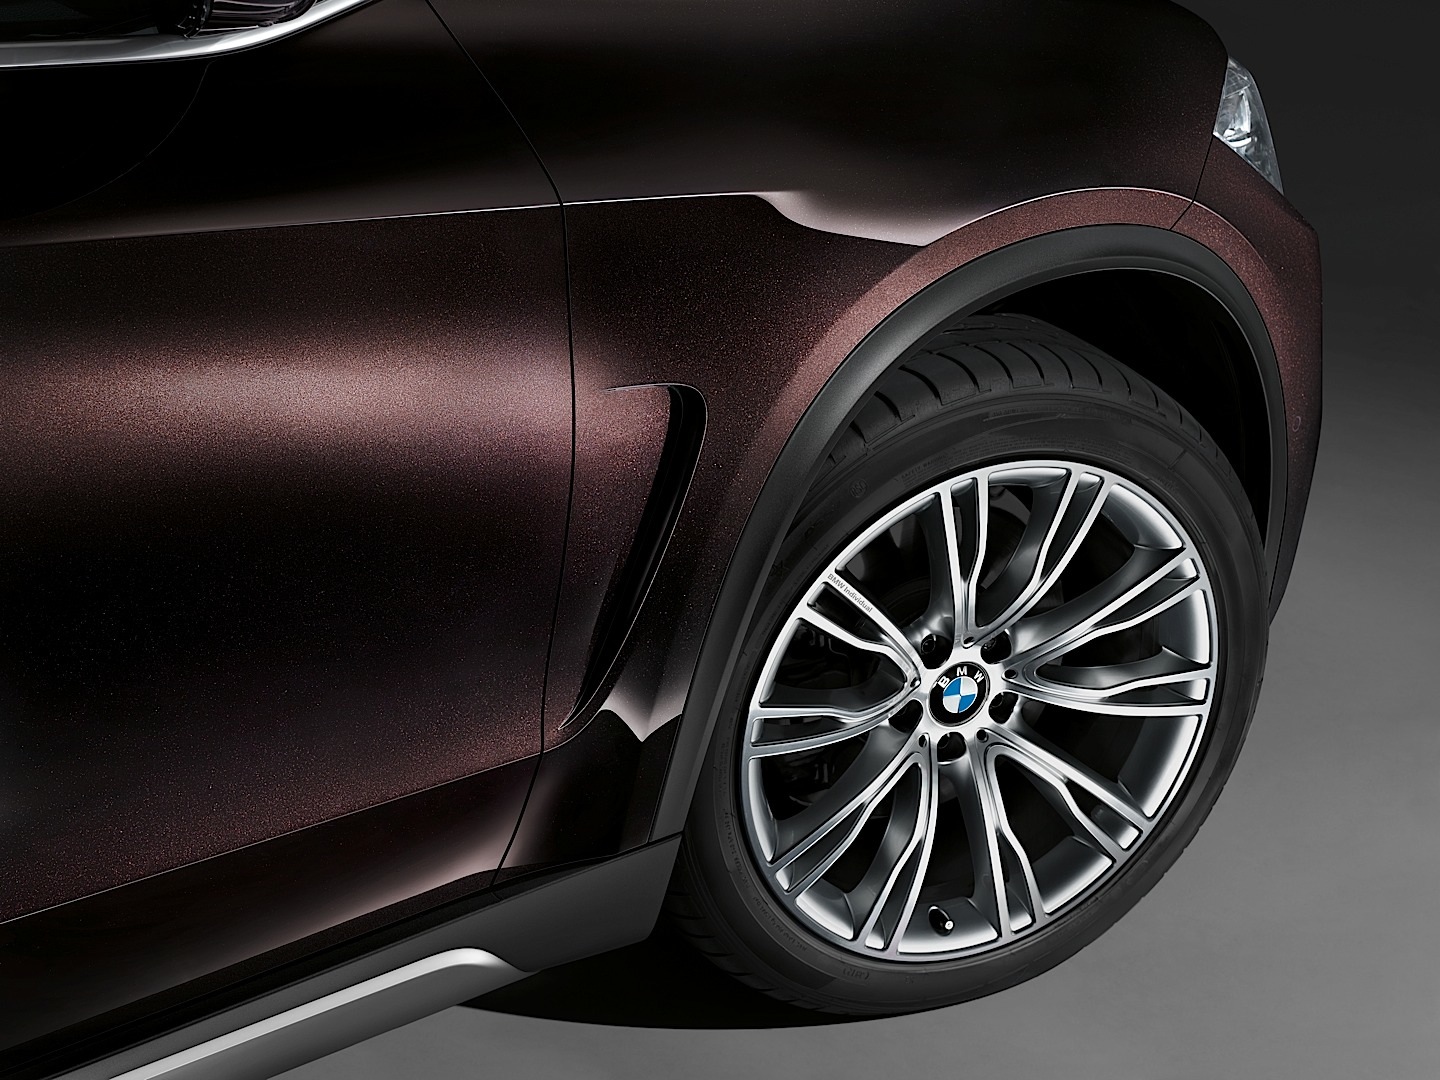 What are the features of the BMW X5?